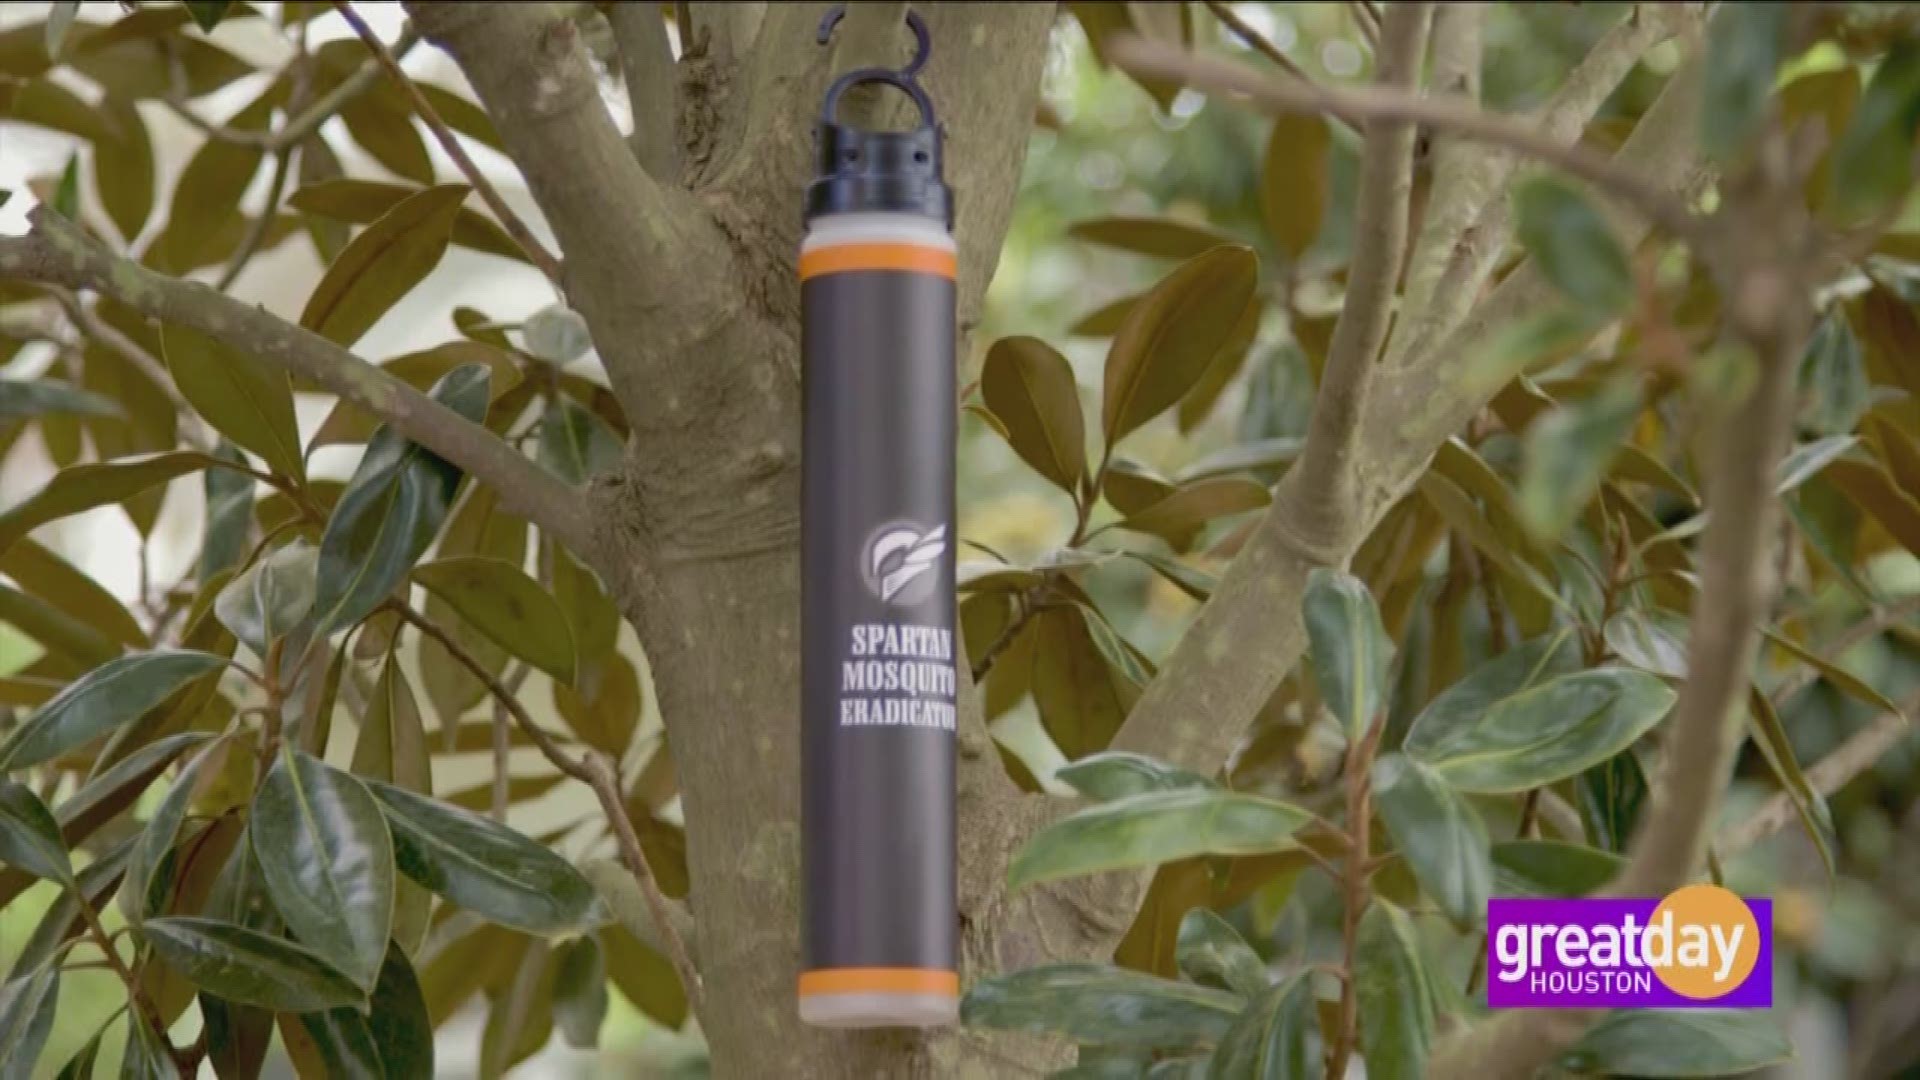 Jeremy Hirsch, Creator of Spartan Mosquito, can help you keep your yard mosquito-free.